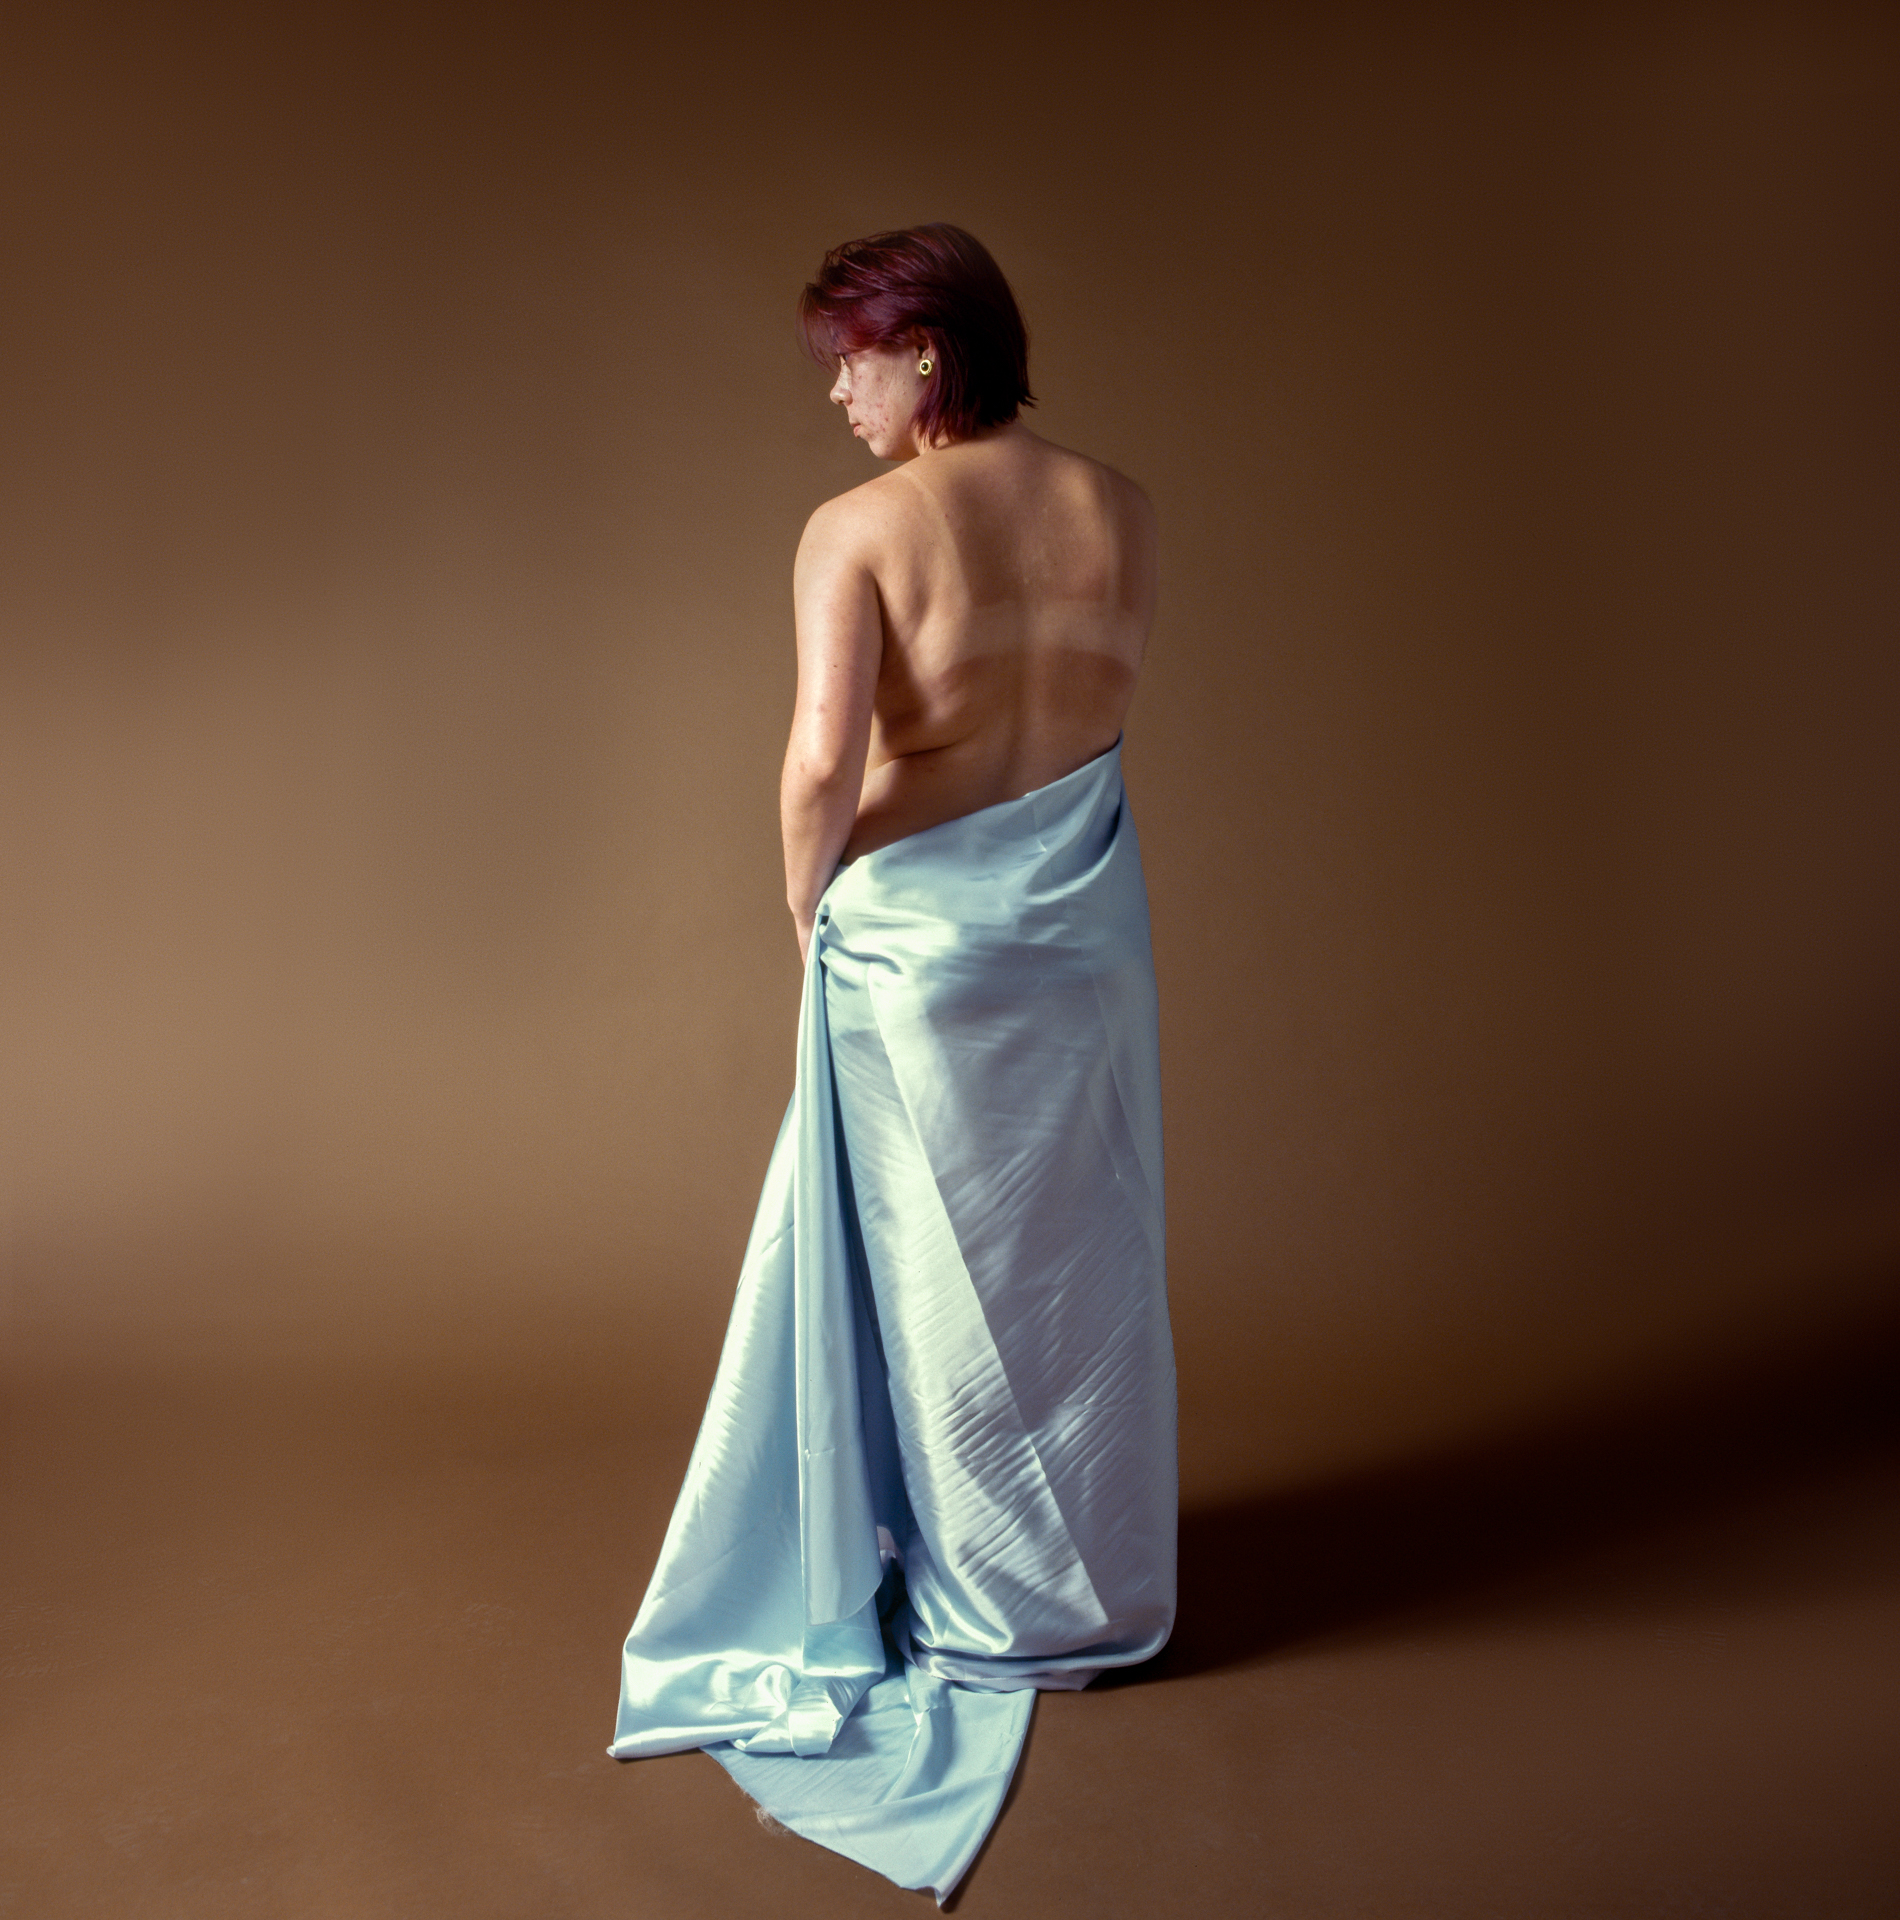 Cut From The Same Cloth An image of a young woman with short red hair stands with her sunburnt back towards the camera, the lower half of her body only covered by a blue sheet.